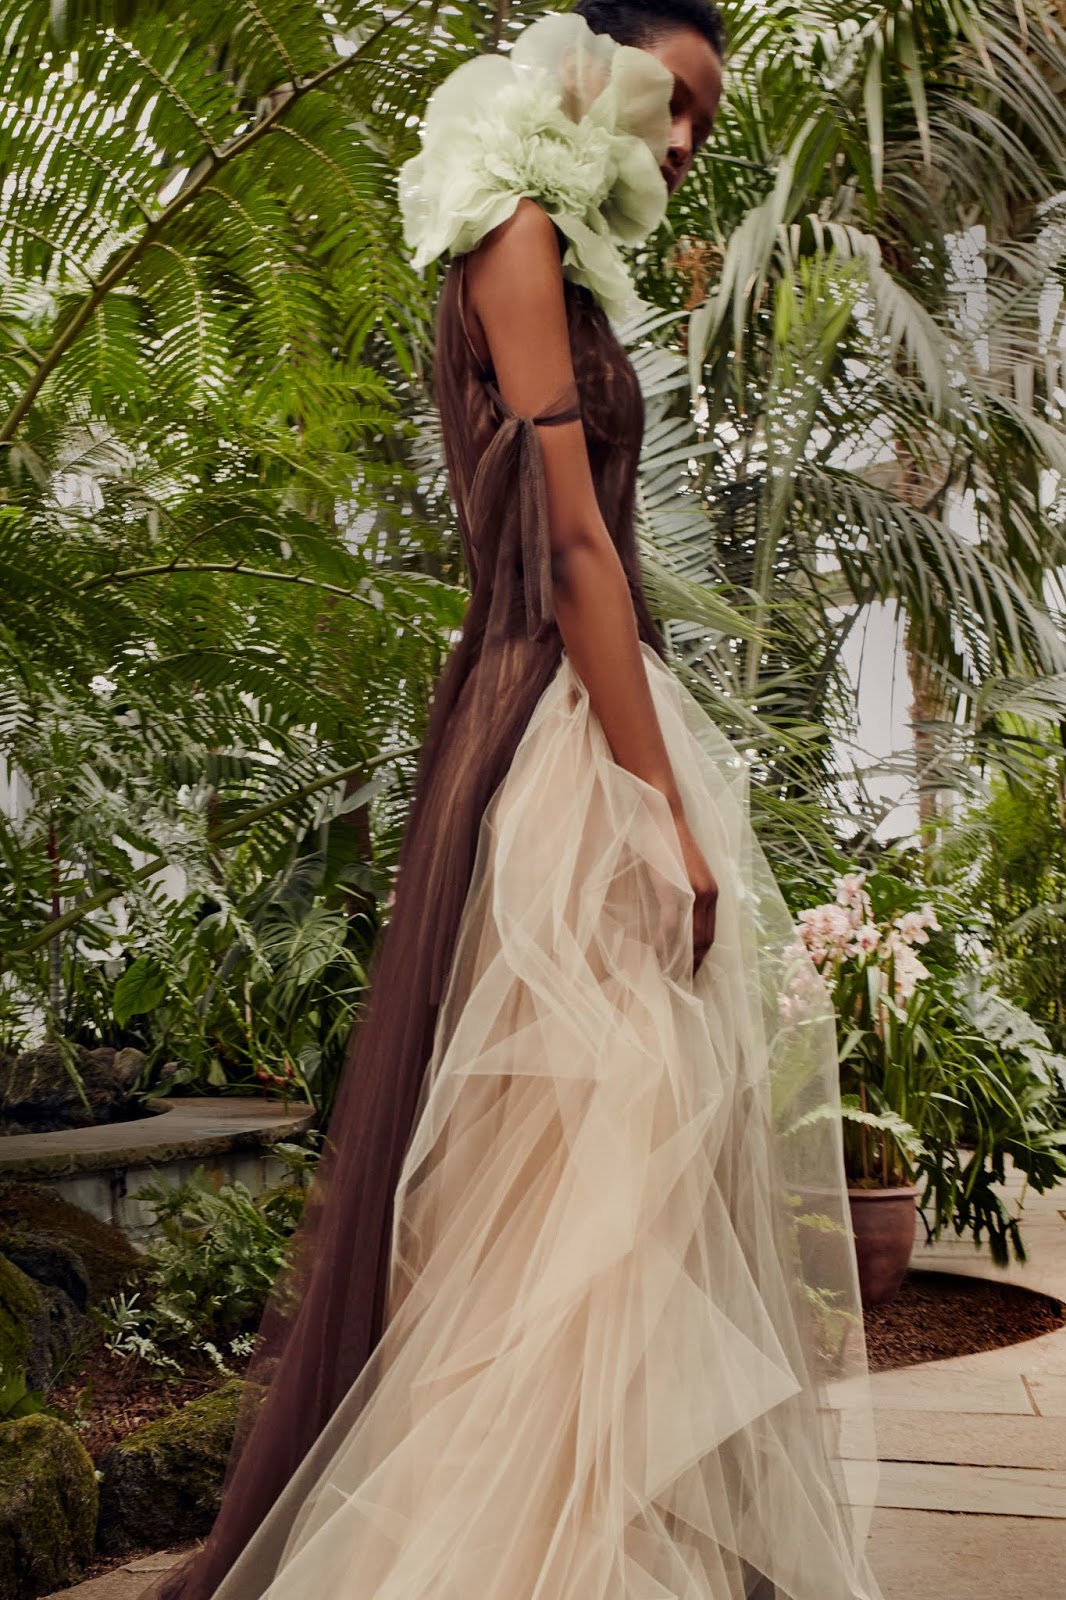 WEDDING GOWN GLAMOUR: VERA WANG